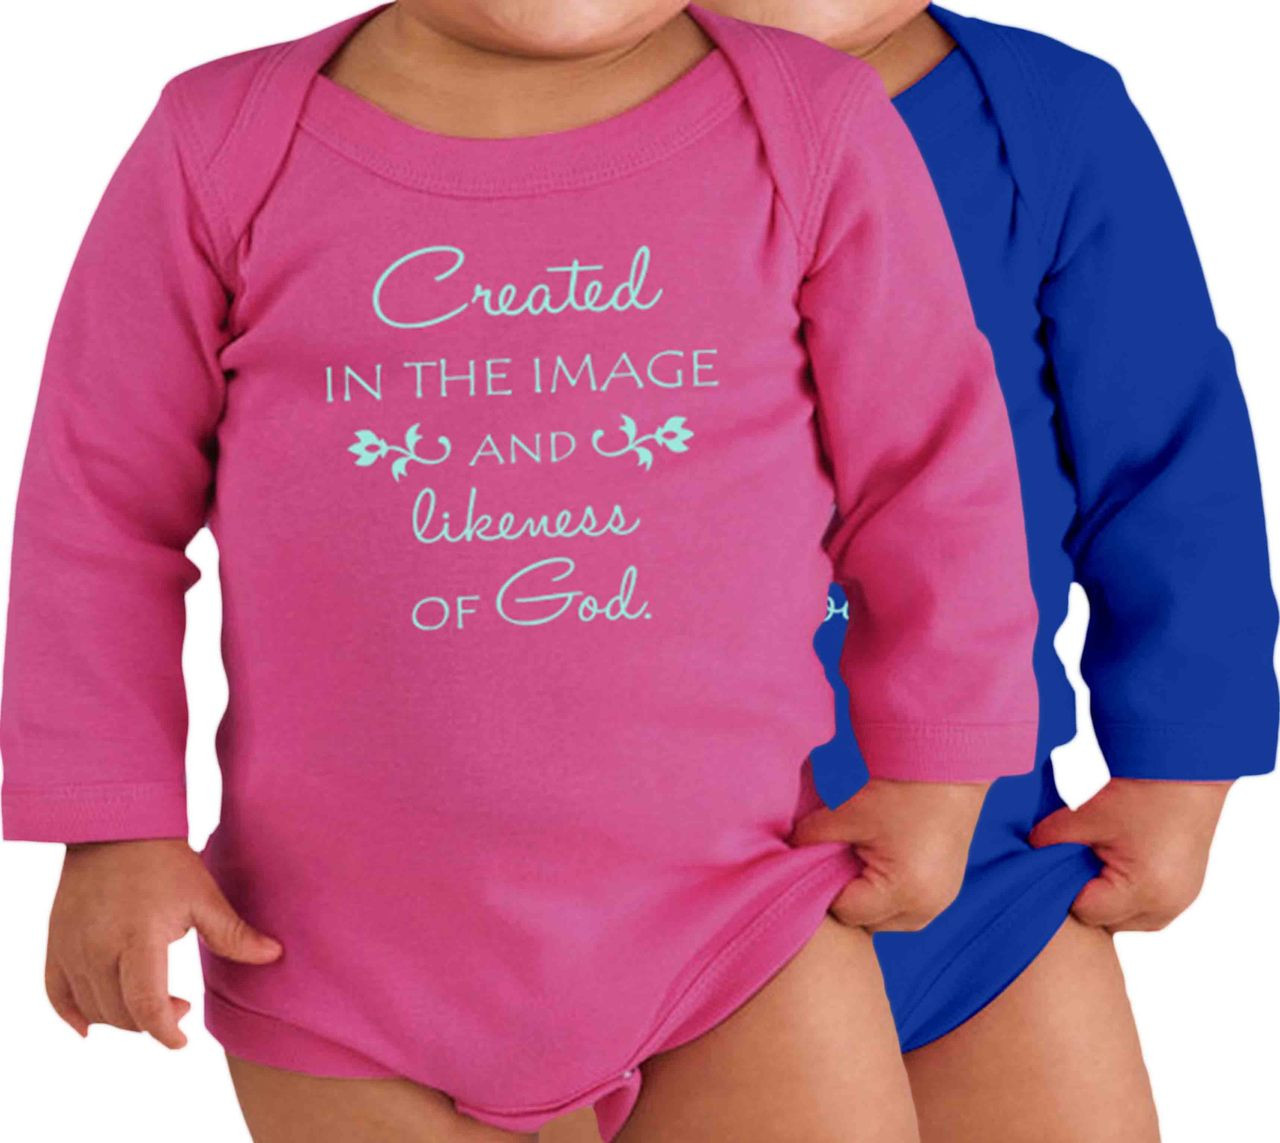 Image and Likeness of God Long-Sleeve Baby Onesie - Catholic to the Max ...